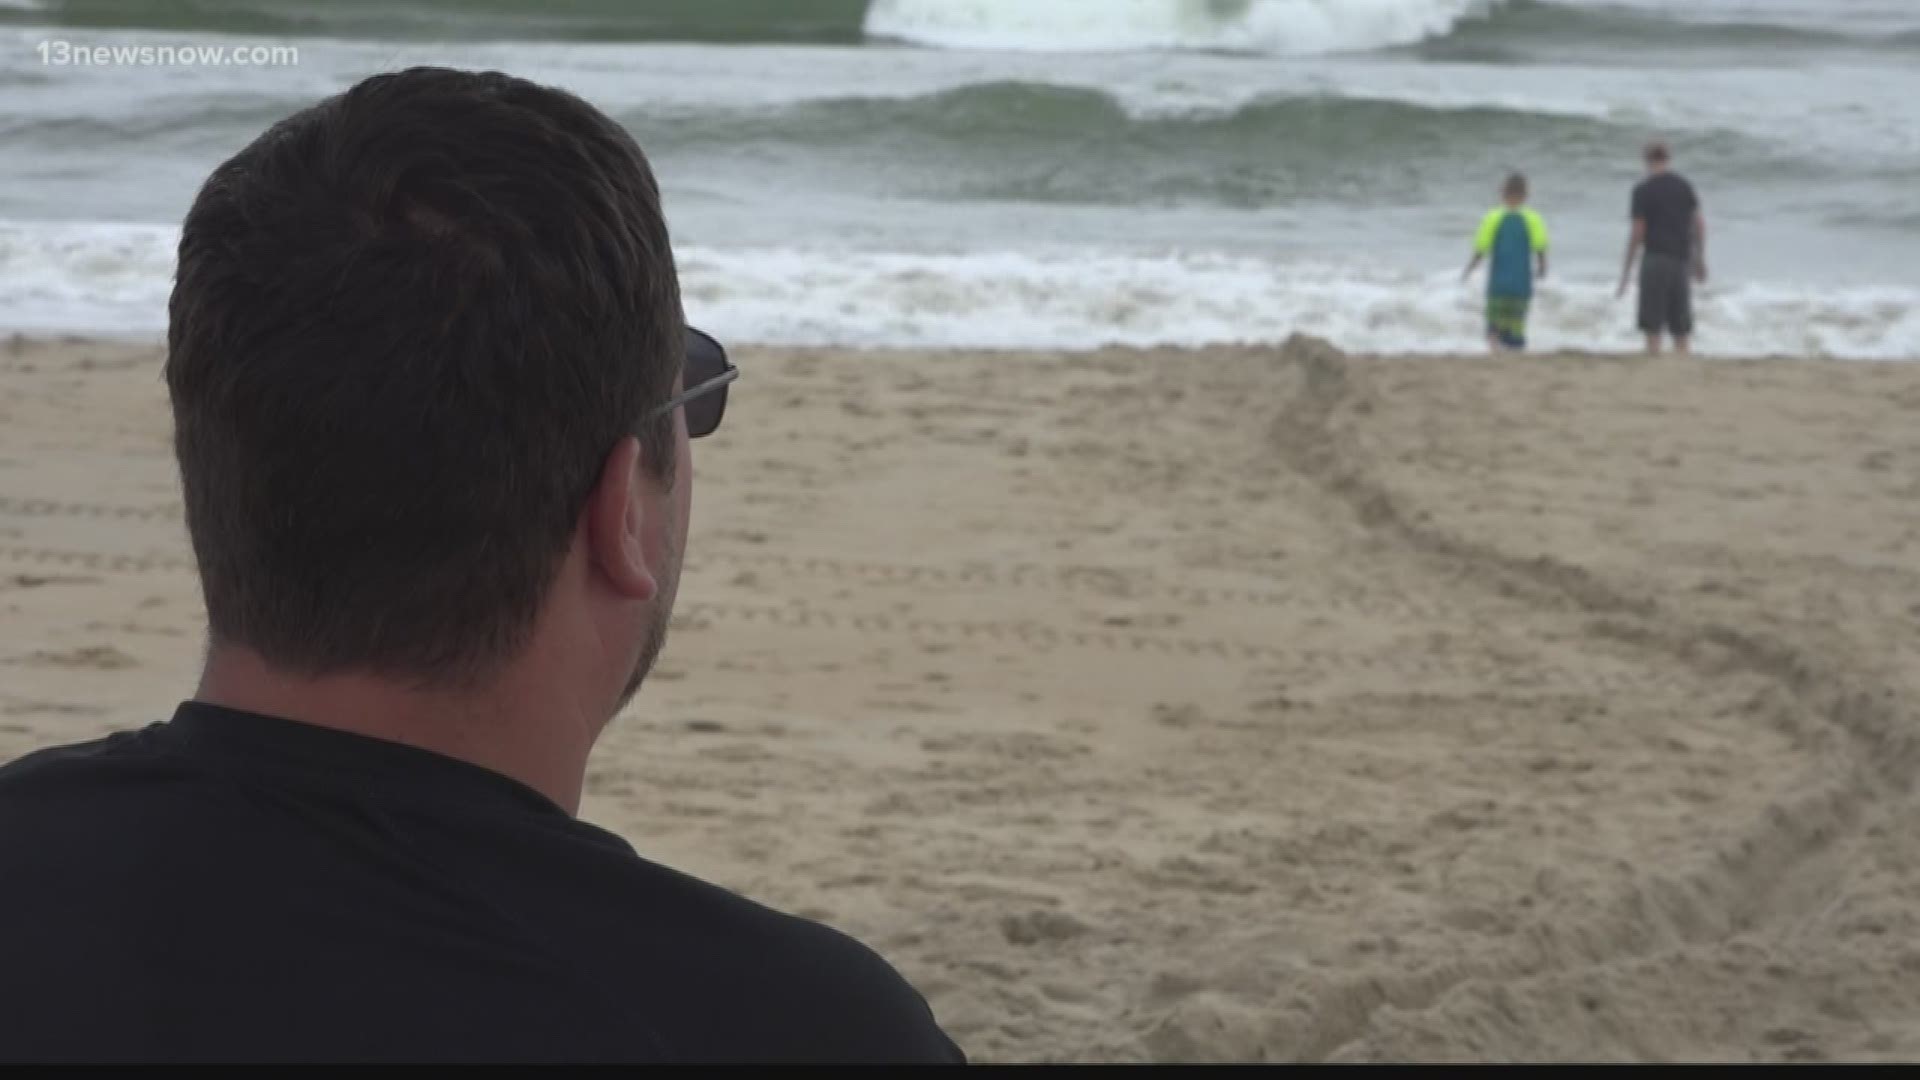 The warning over rip currents comes after one swimmer goes missing and another is found dead.